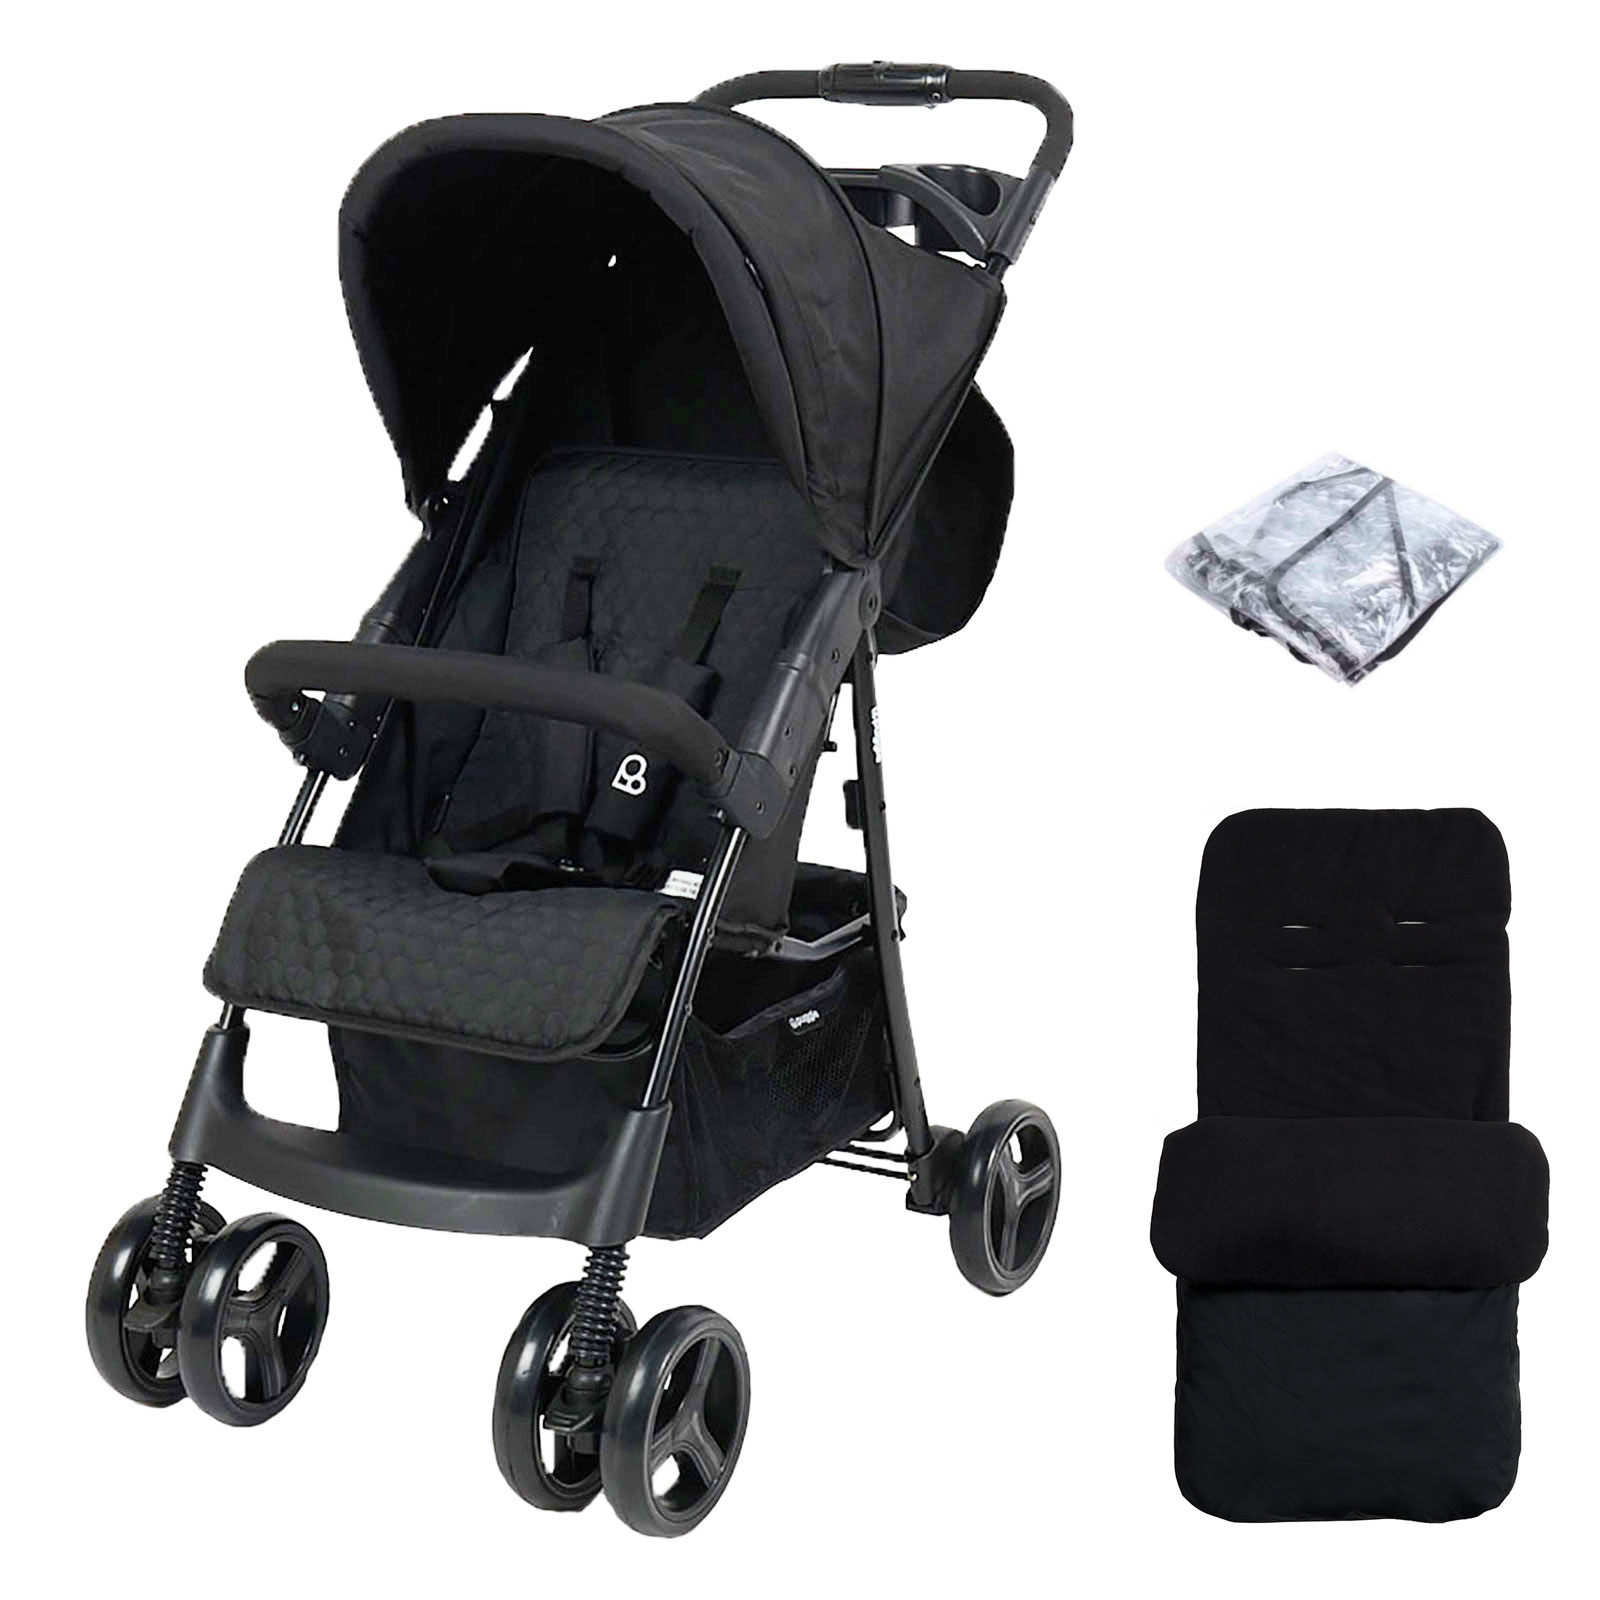 Puggle Starmax Pushchair Stroller with Raincover and Universal Deluxe Footmuff – Storm Black